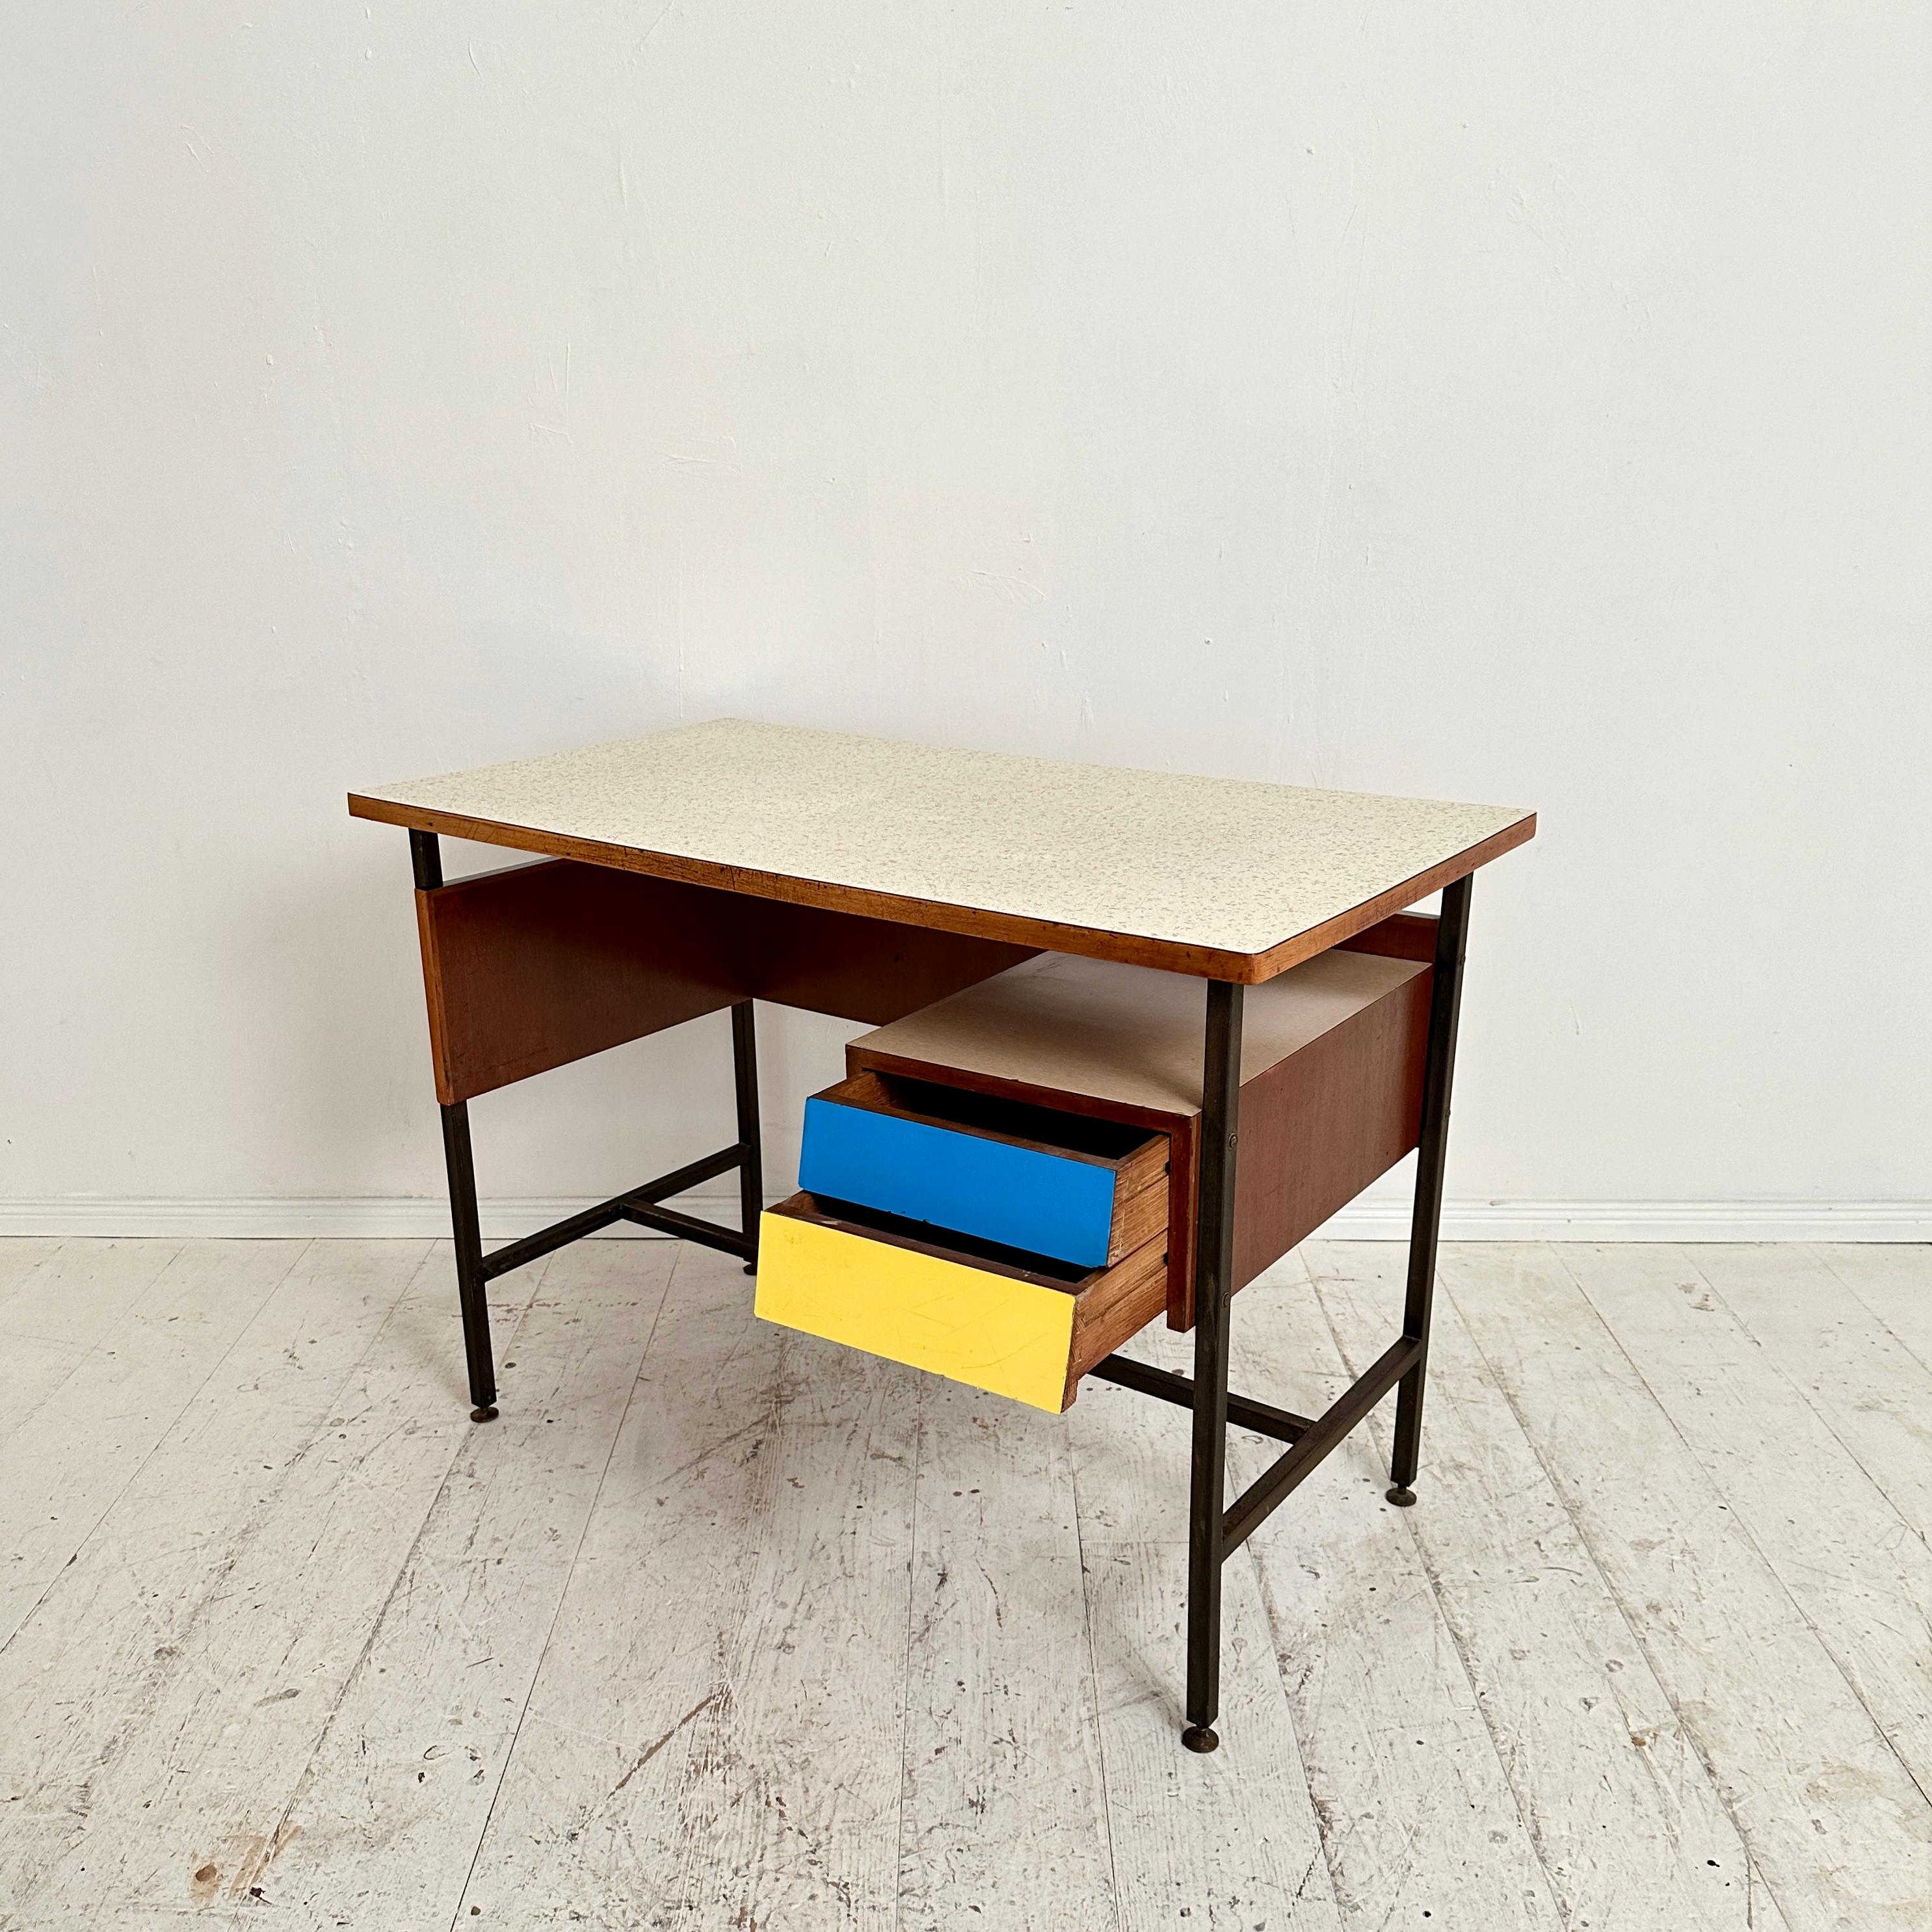 Small Mid Century Italian Desk in Metal, Walnut and Formica, around 1950 For Sale 7